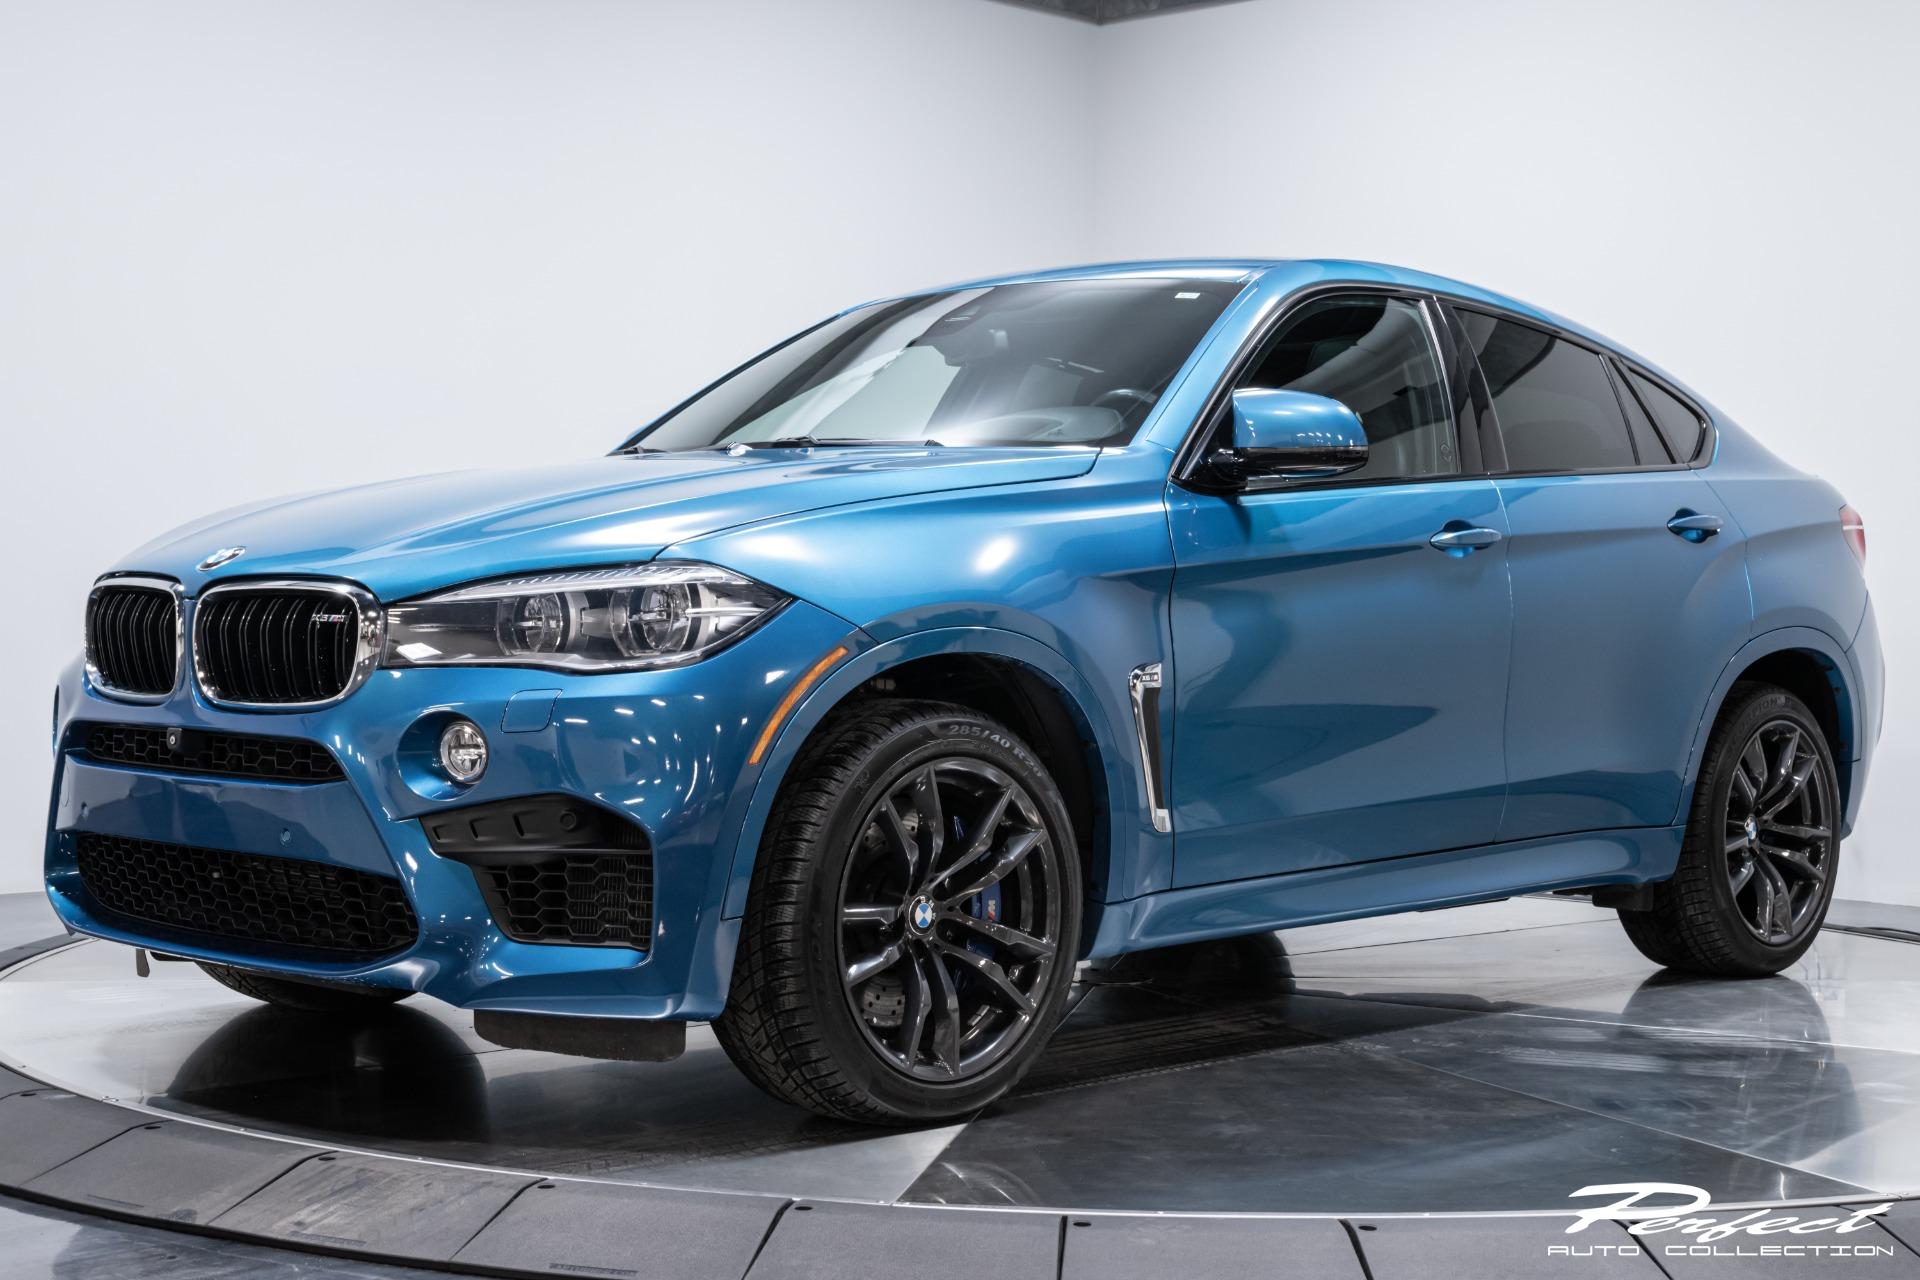 Used 2015 BMW X6 M For Sale ($44,993) | Perfect Auto Collection Stock #